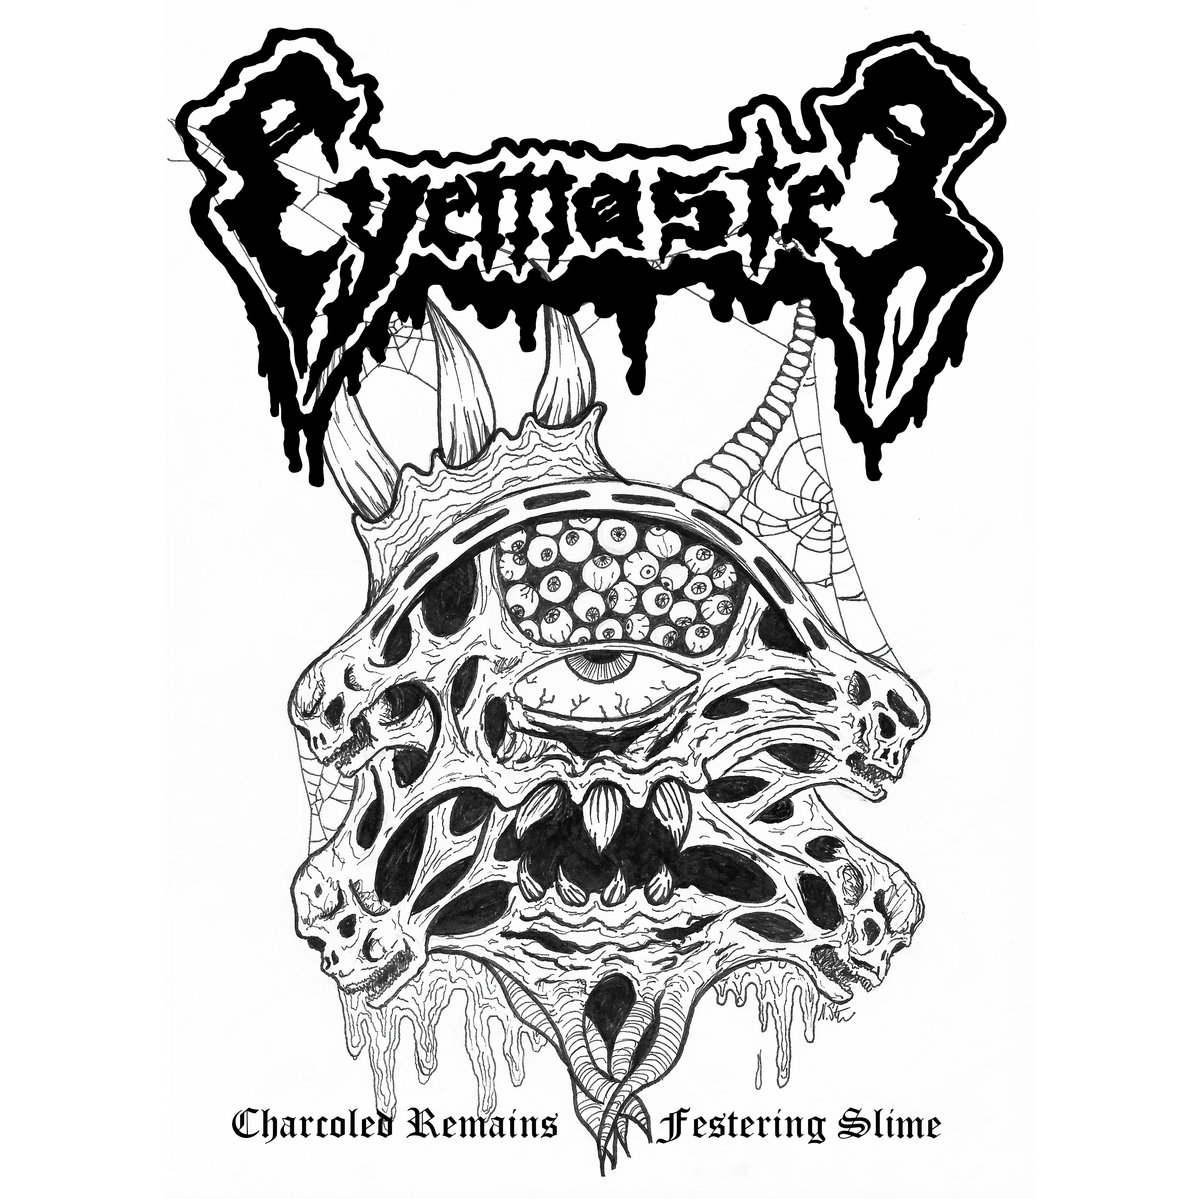 Eyemaster's Charcoal Remains album cover